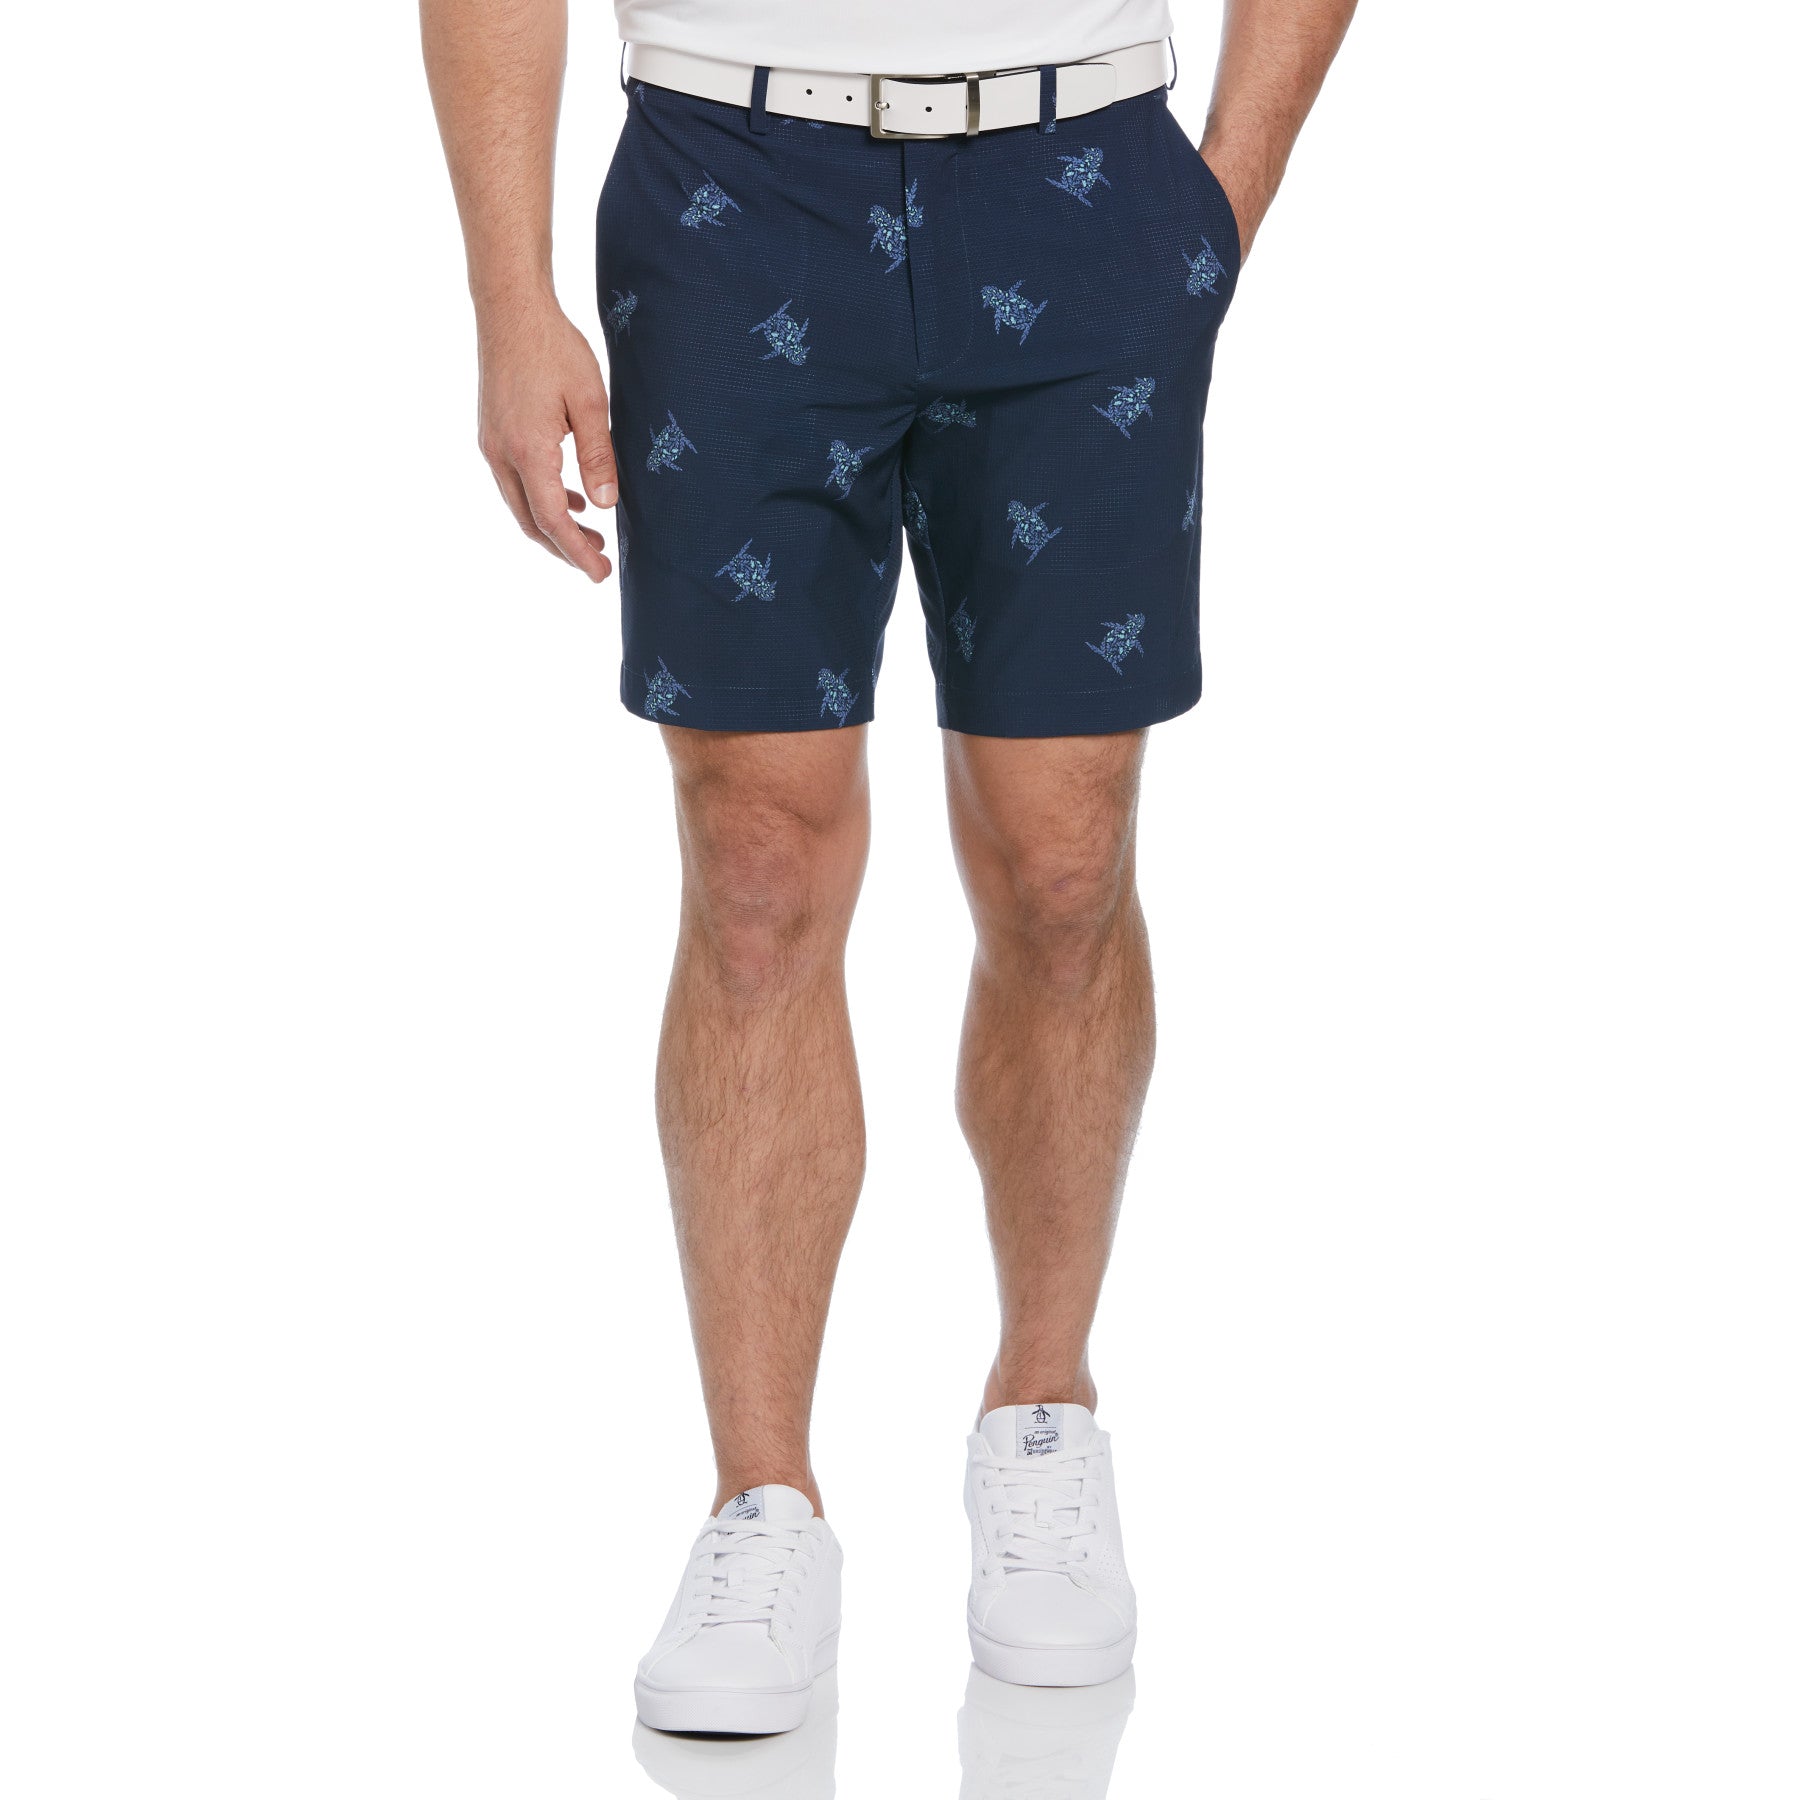 View 60s Floral Pete Print 8 Golf Shorts In Black Iris information